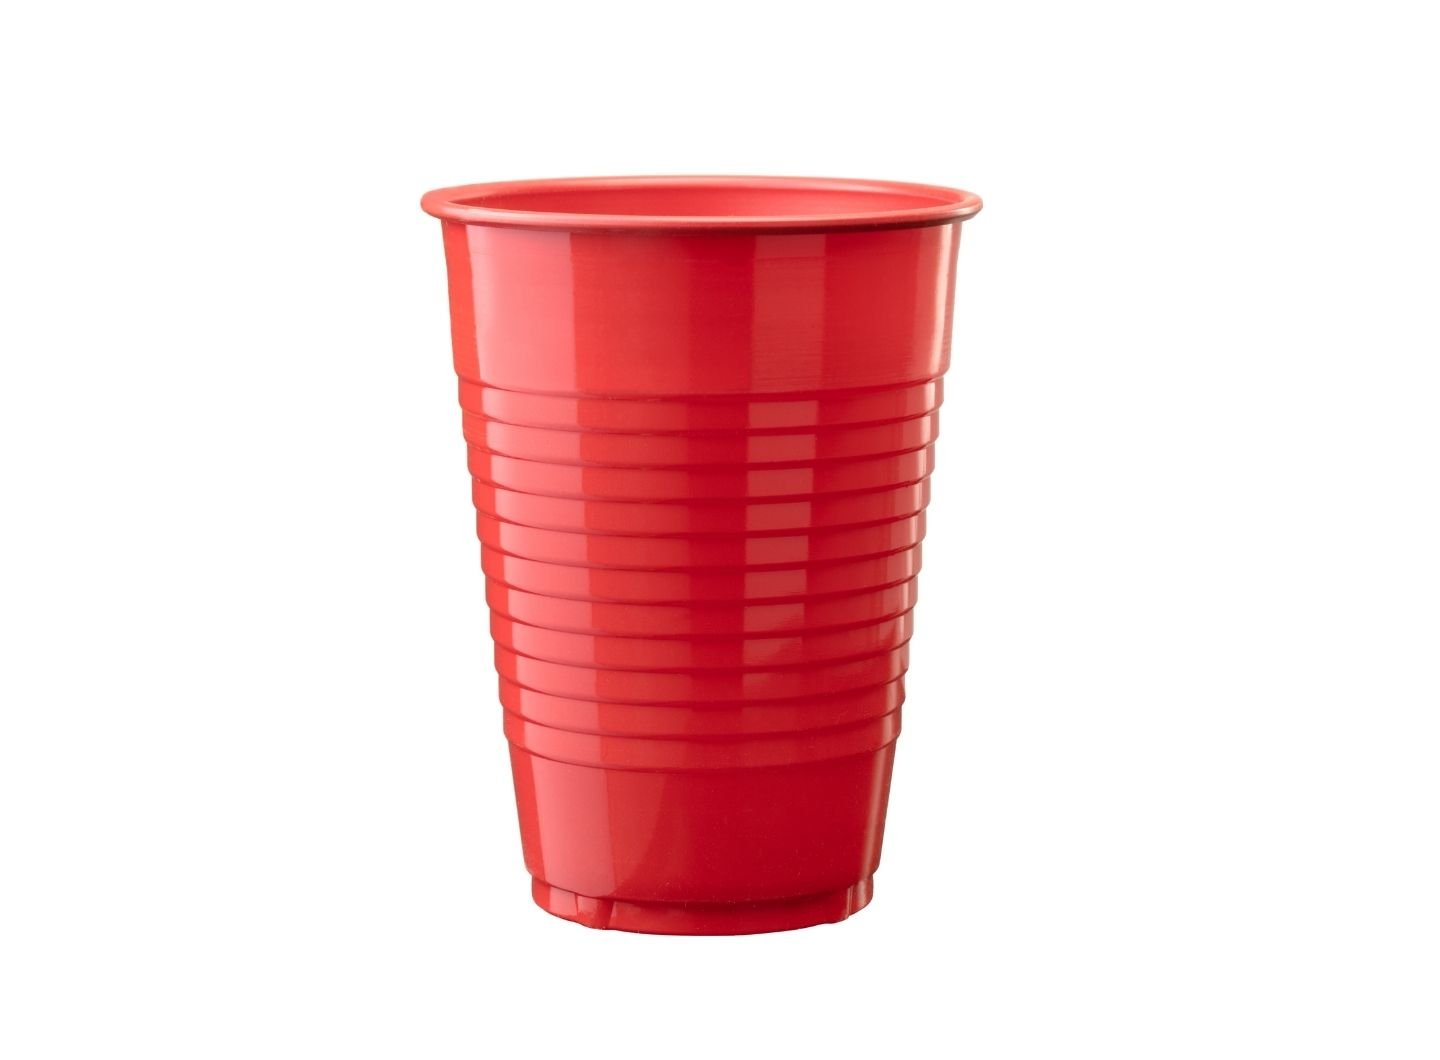 Apple Red 12-Ounce Amscan Big Party Pack 50 Count Plastic Cups